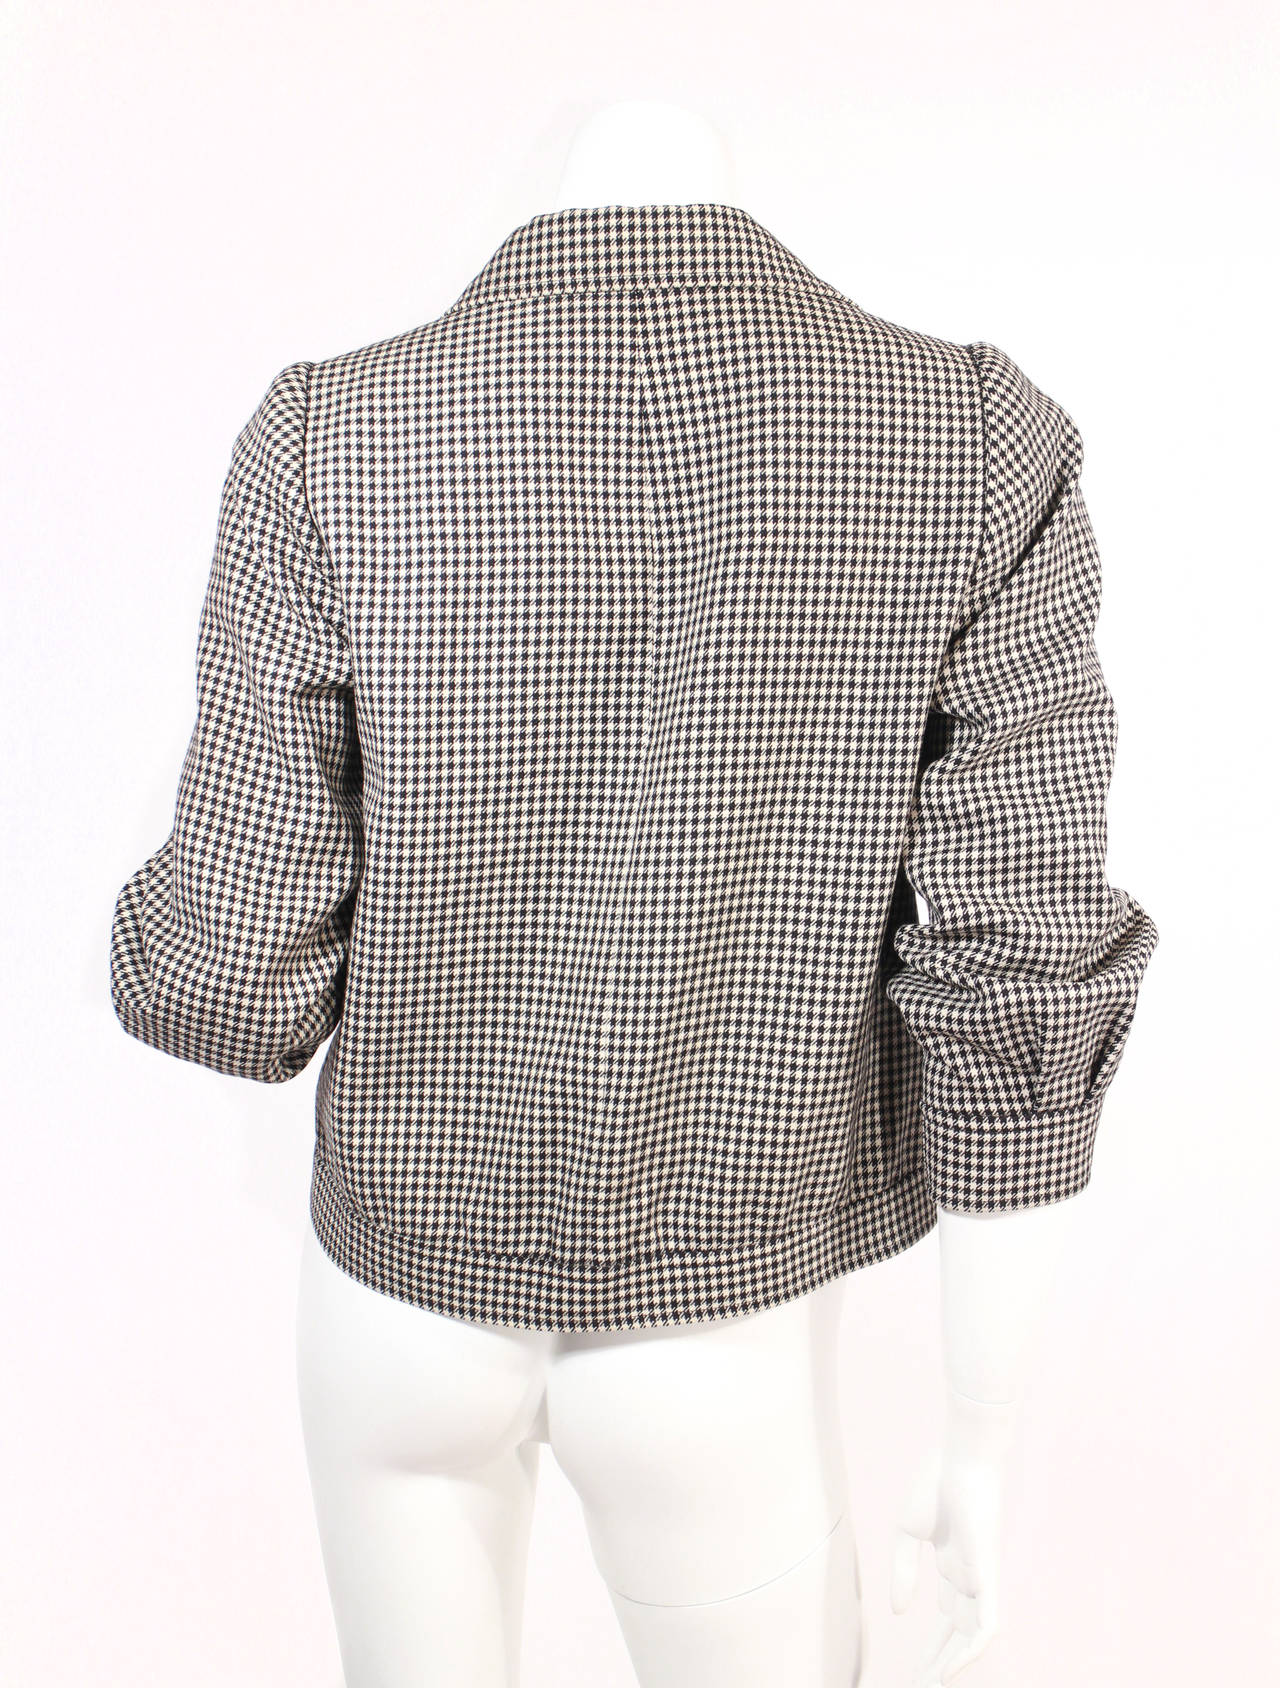 Yves Saint Laurent Houndstooth Jacket with 3/4 Sleeves In Excellent Condition In New York, NY